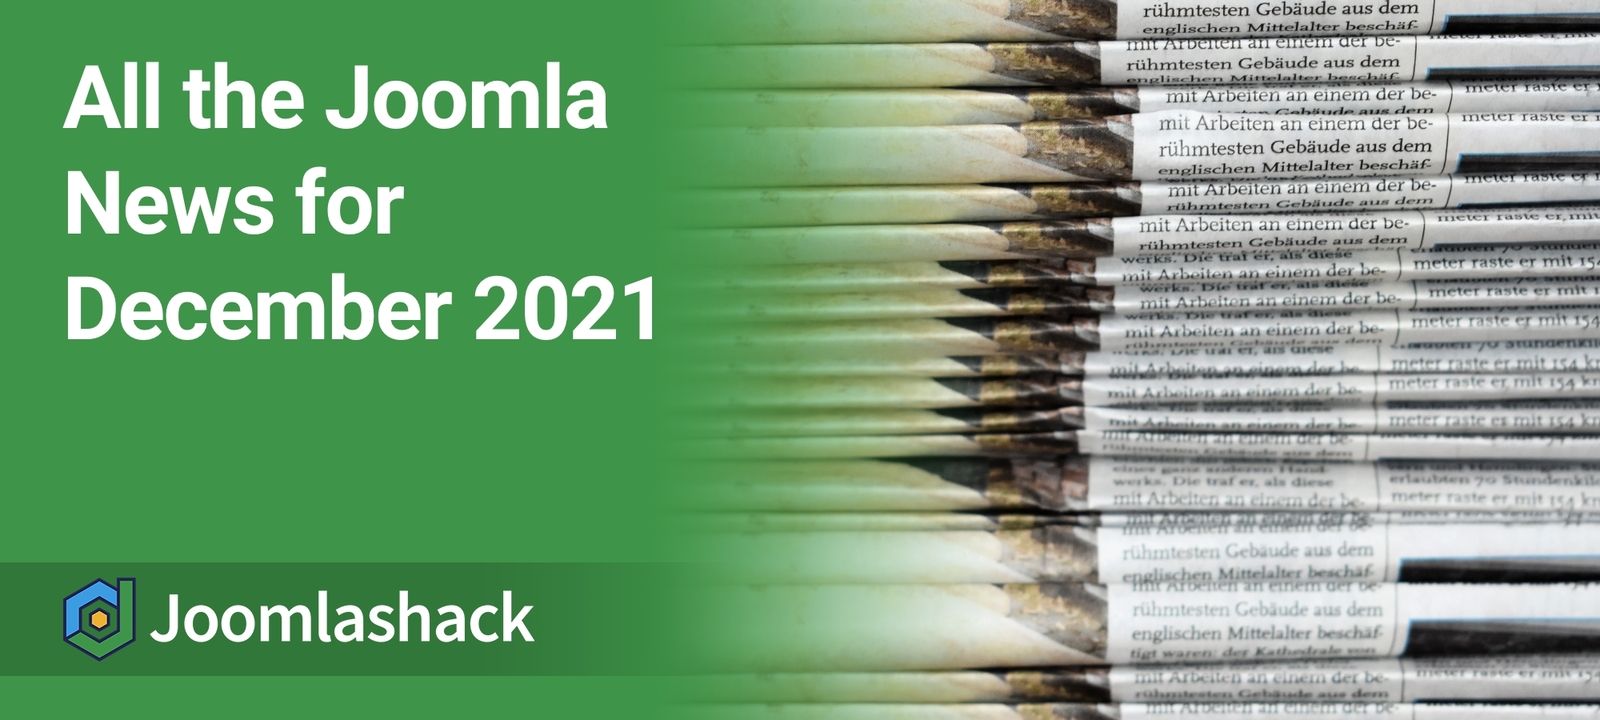 All the Joomla News for December 2021